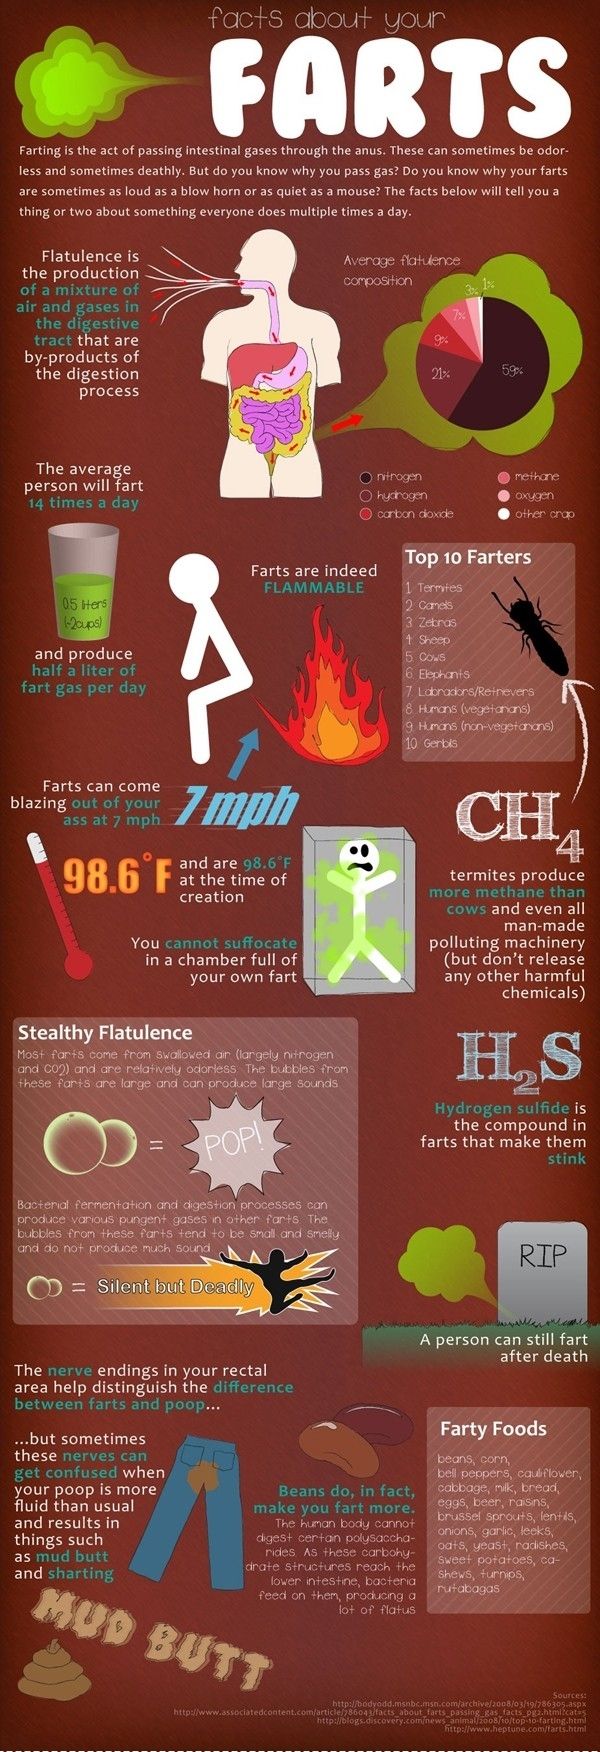 Facts about farts.